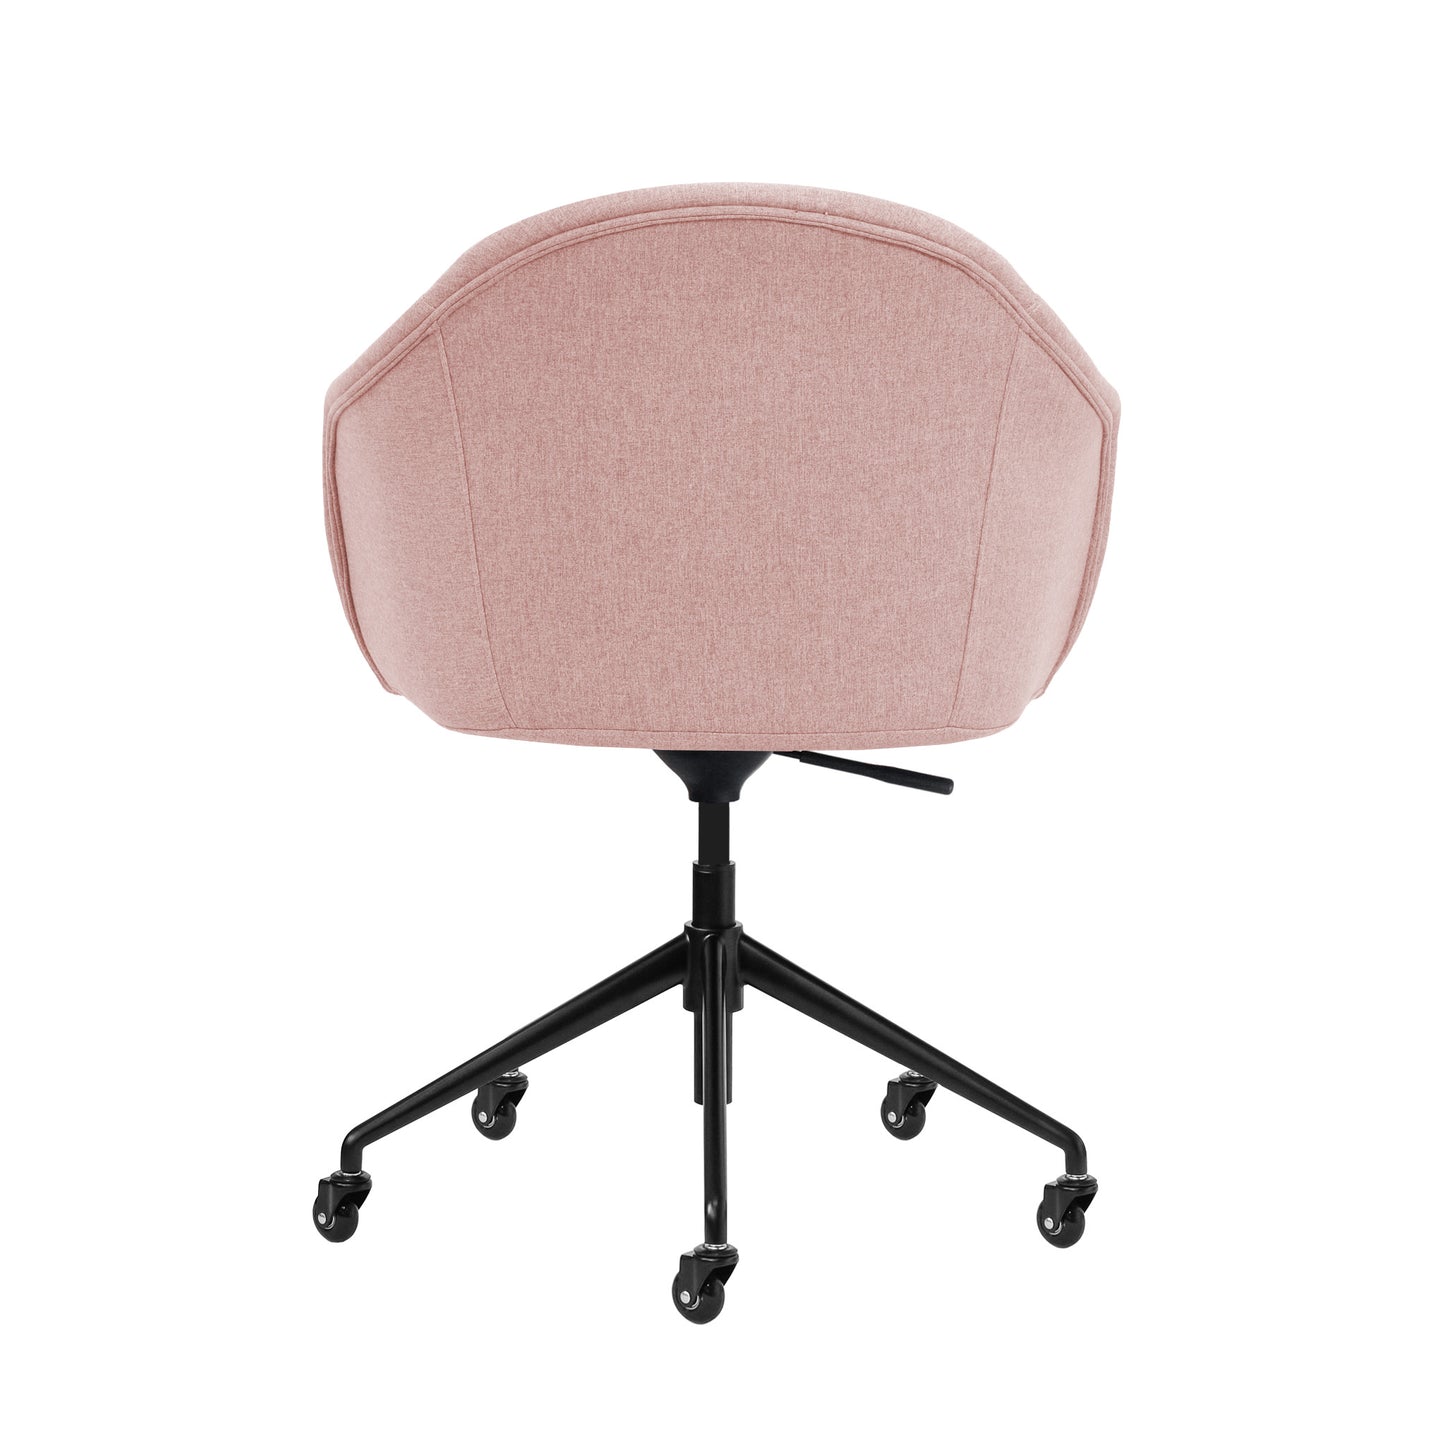 Astoria II Office Chair (Coral Pink)